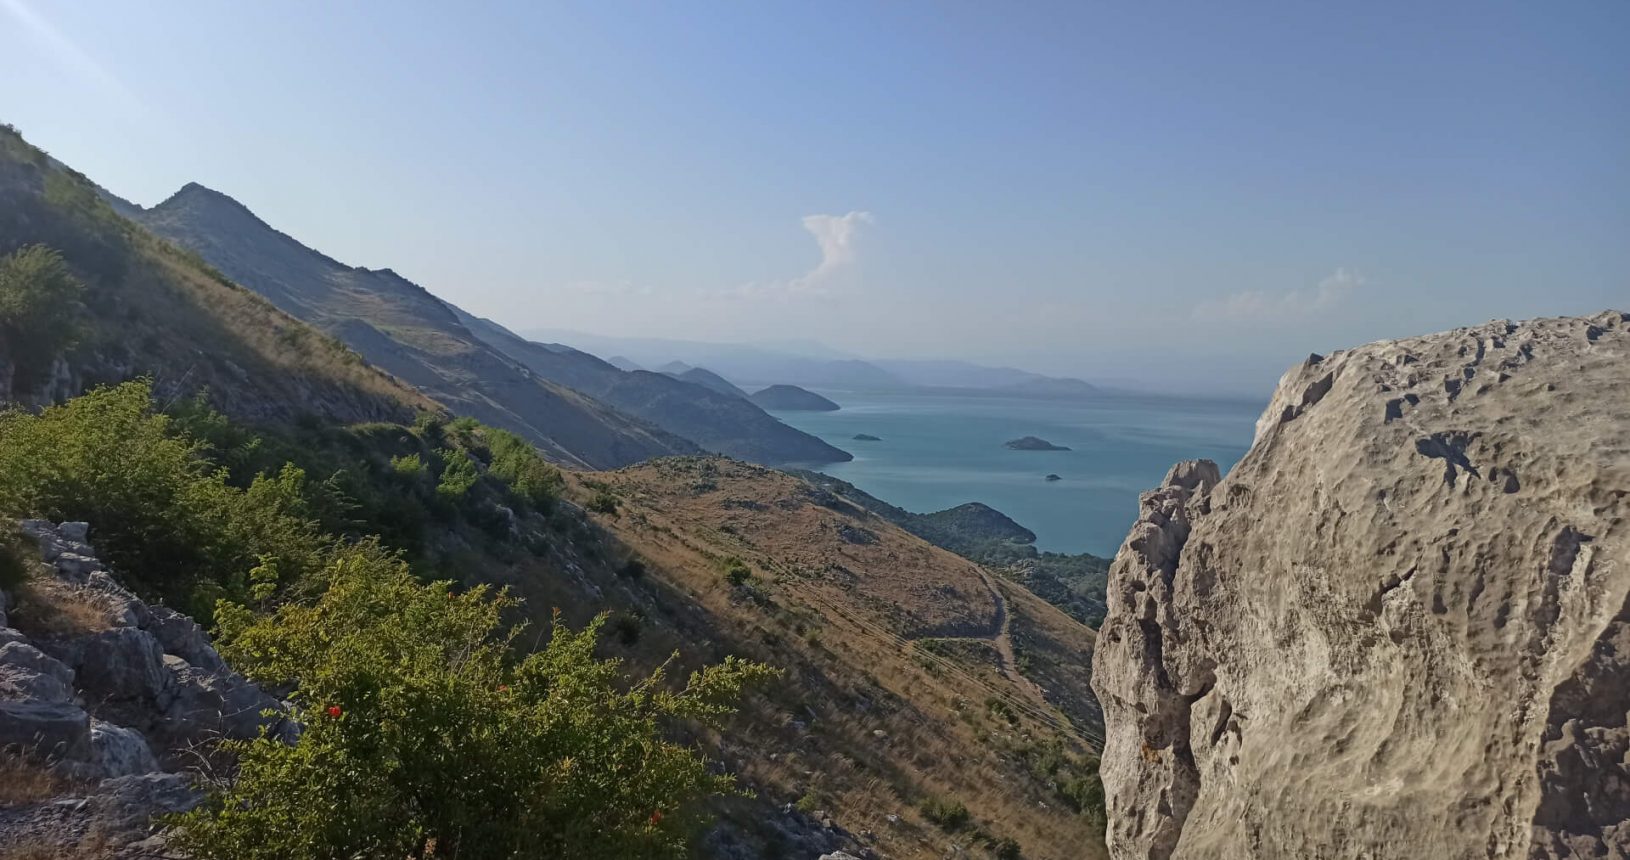 From behind the stone. Skadar lake